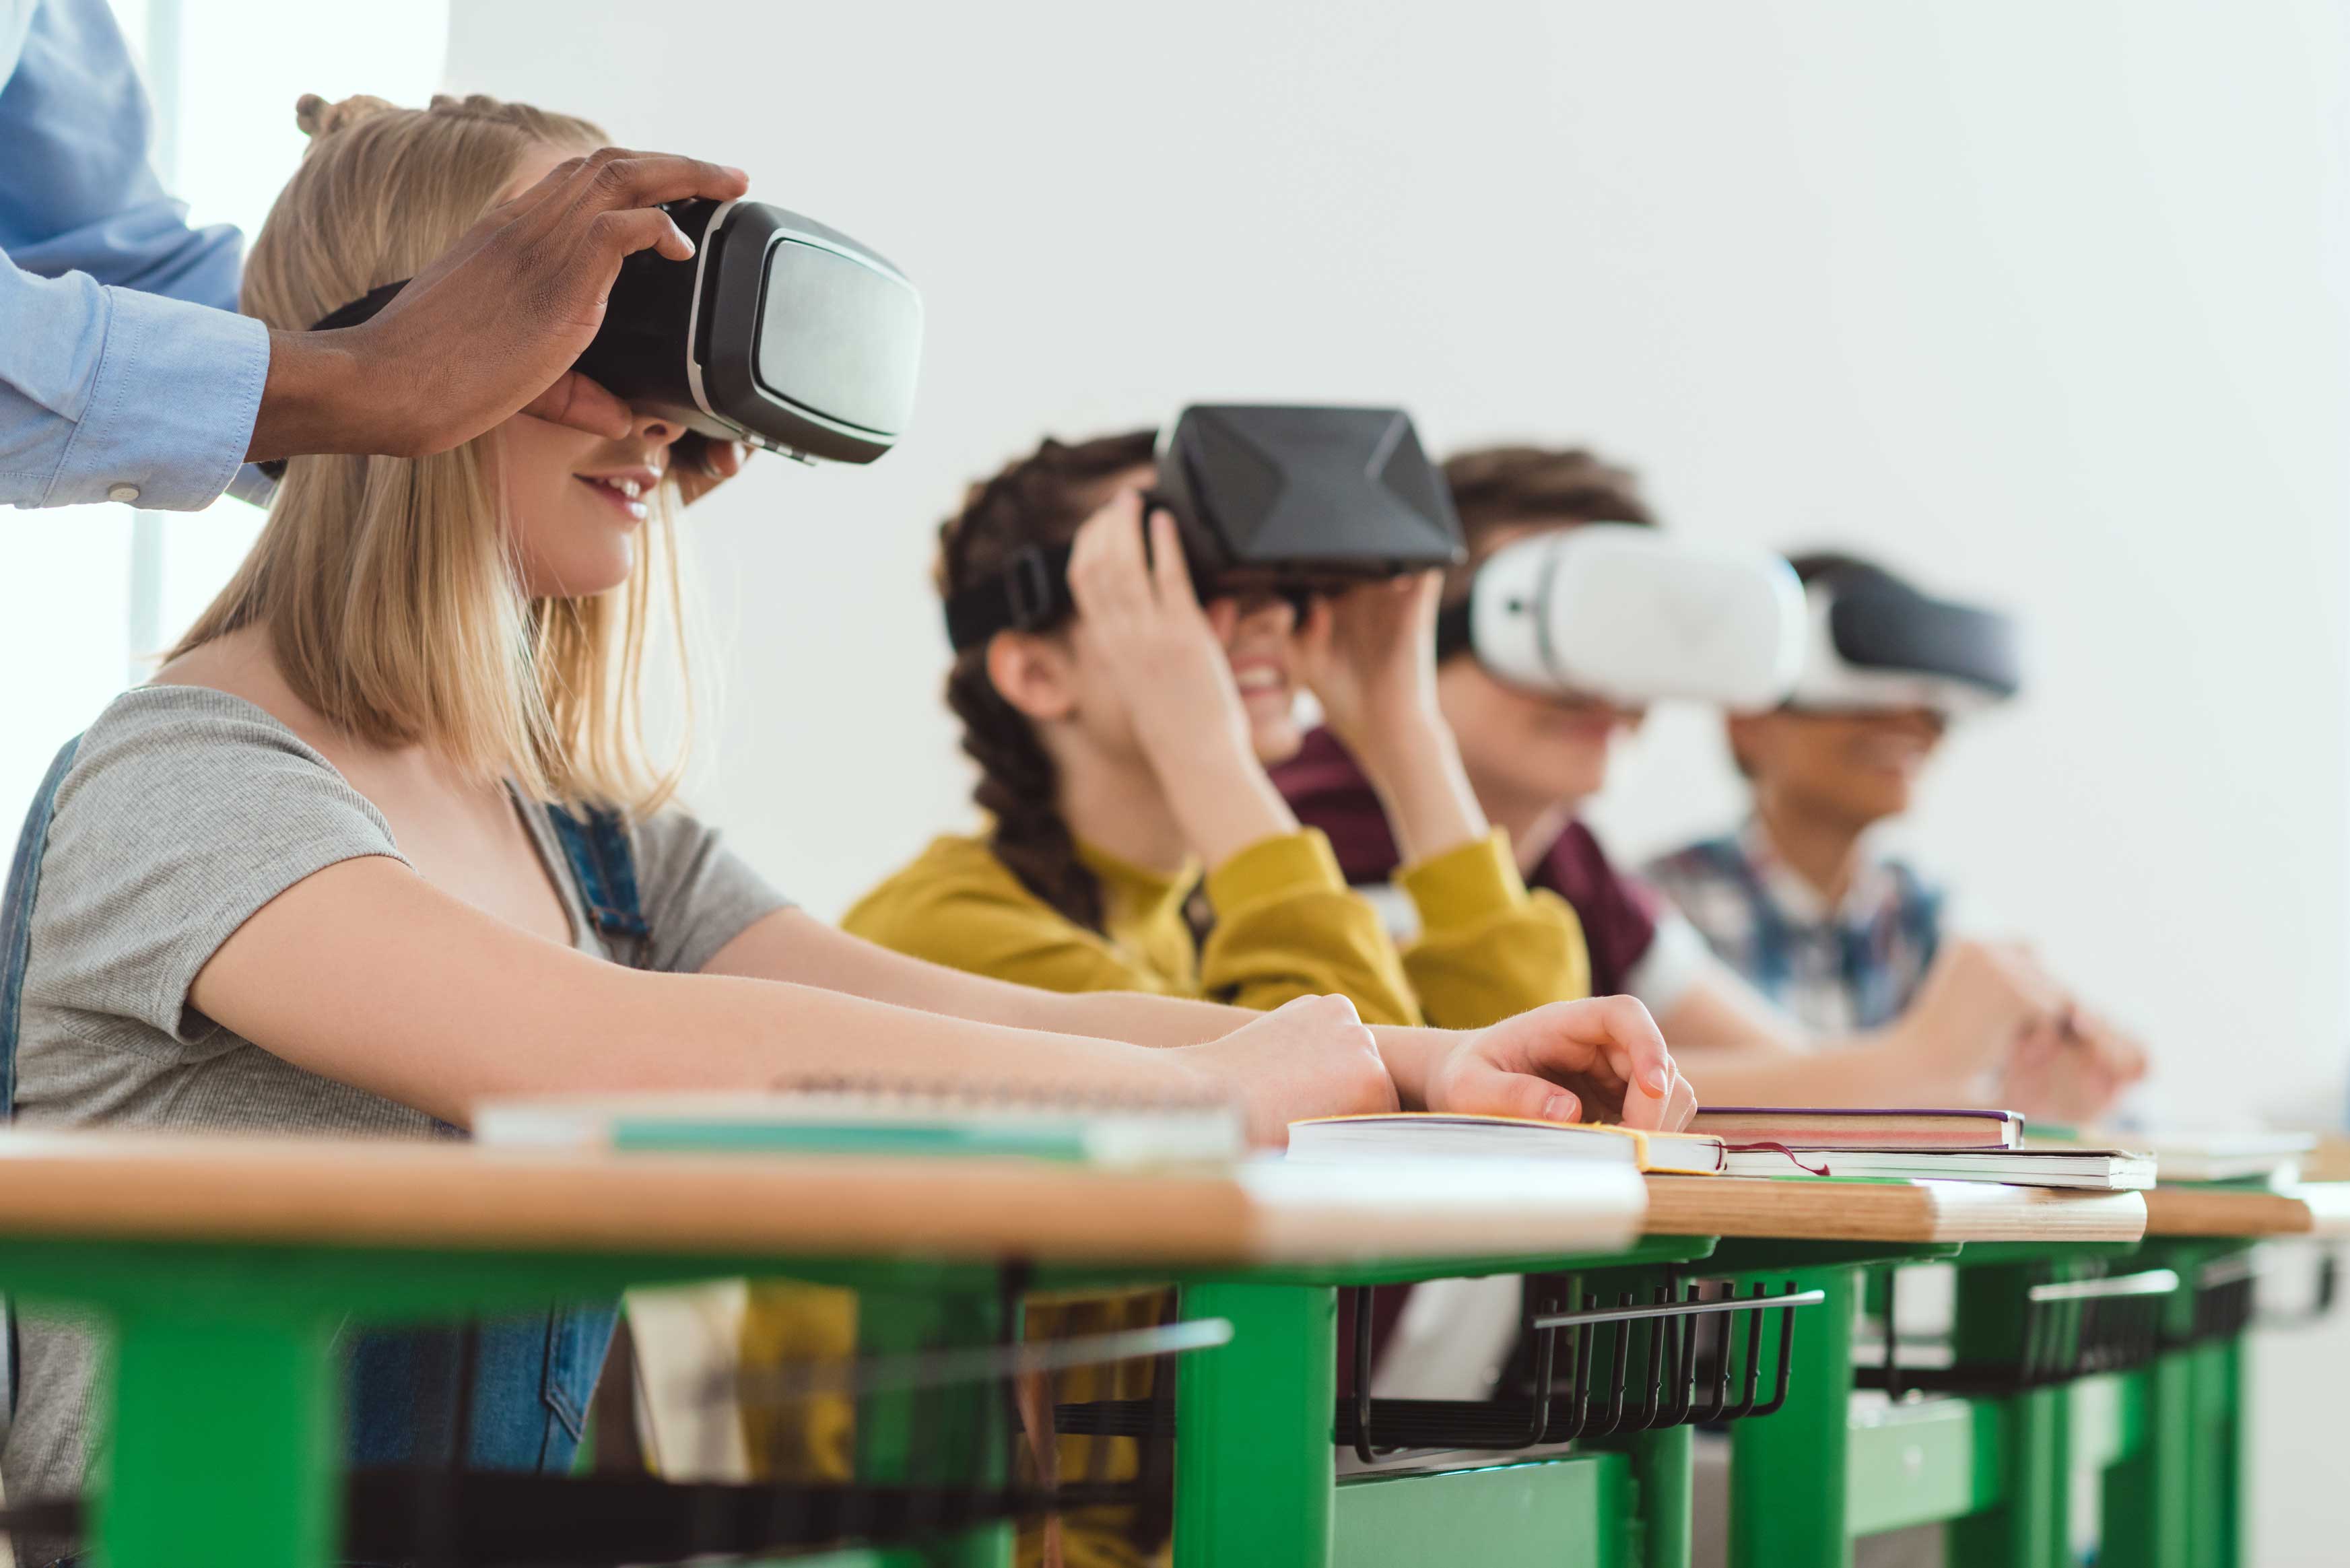 Experied vr virtual reality education tools best vr education products how to use vr to inspure kids vr key stage education materials virtual reality key stage education materials that use vr